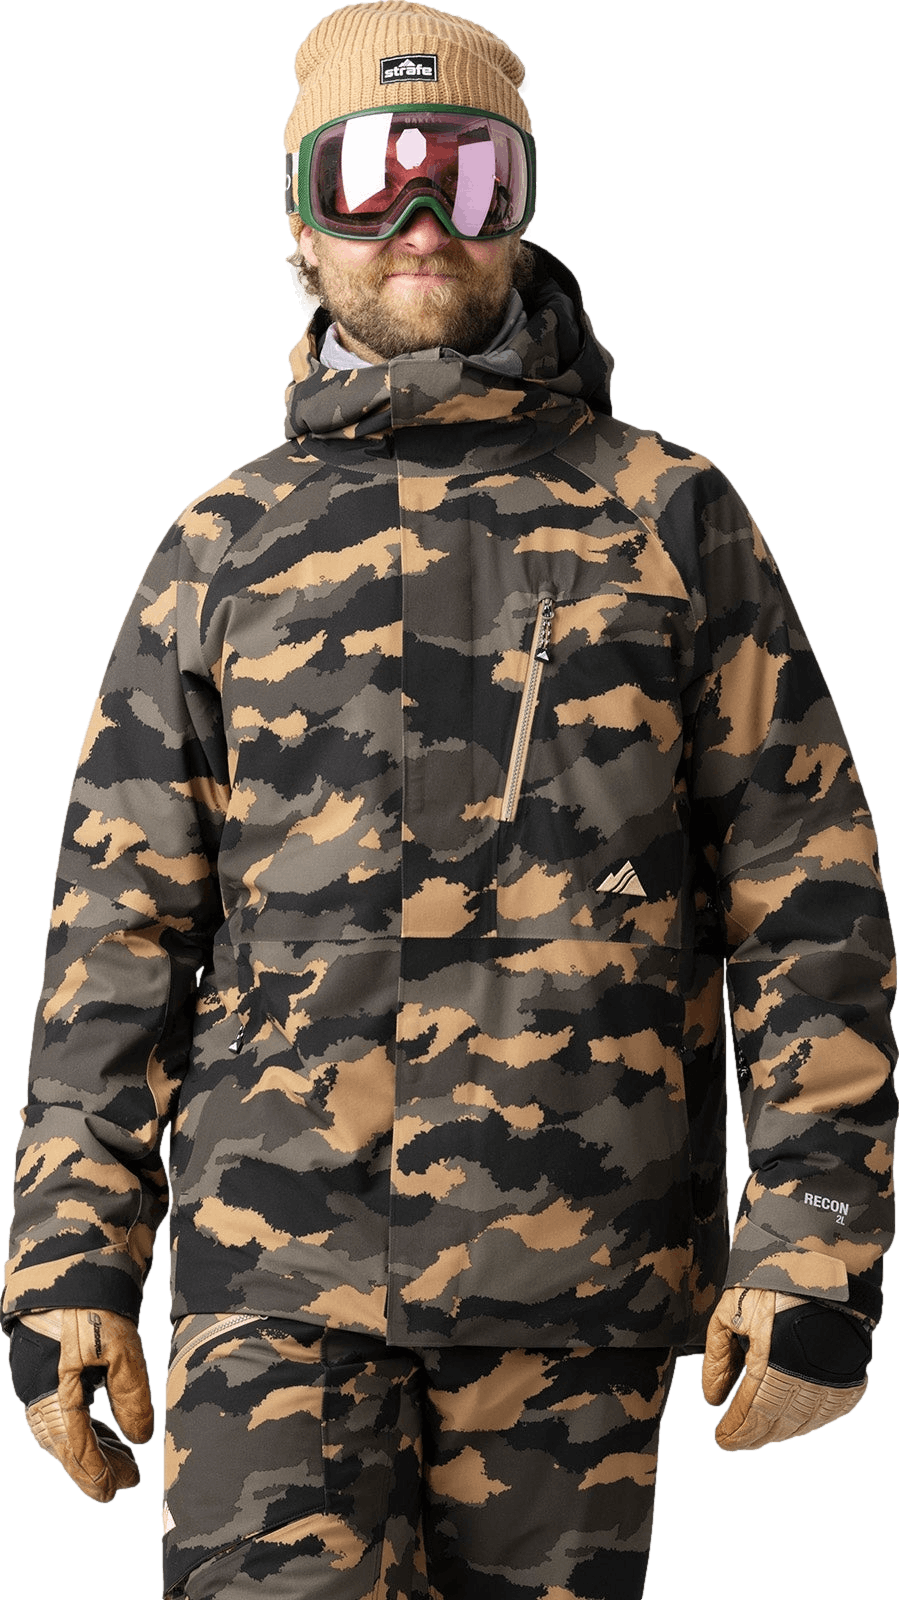 25 Skyward Camouflage Fishing Clothes ideas